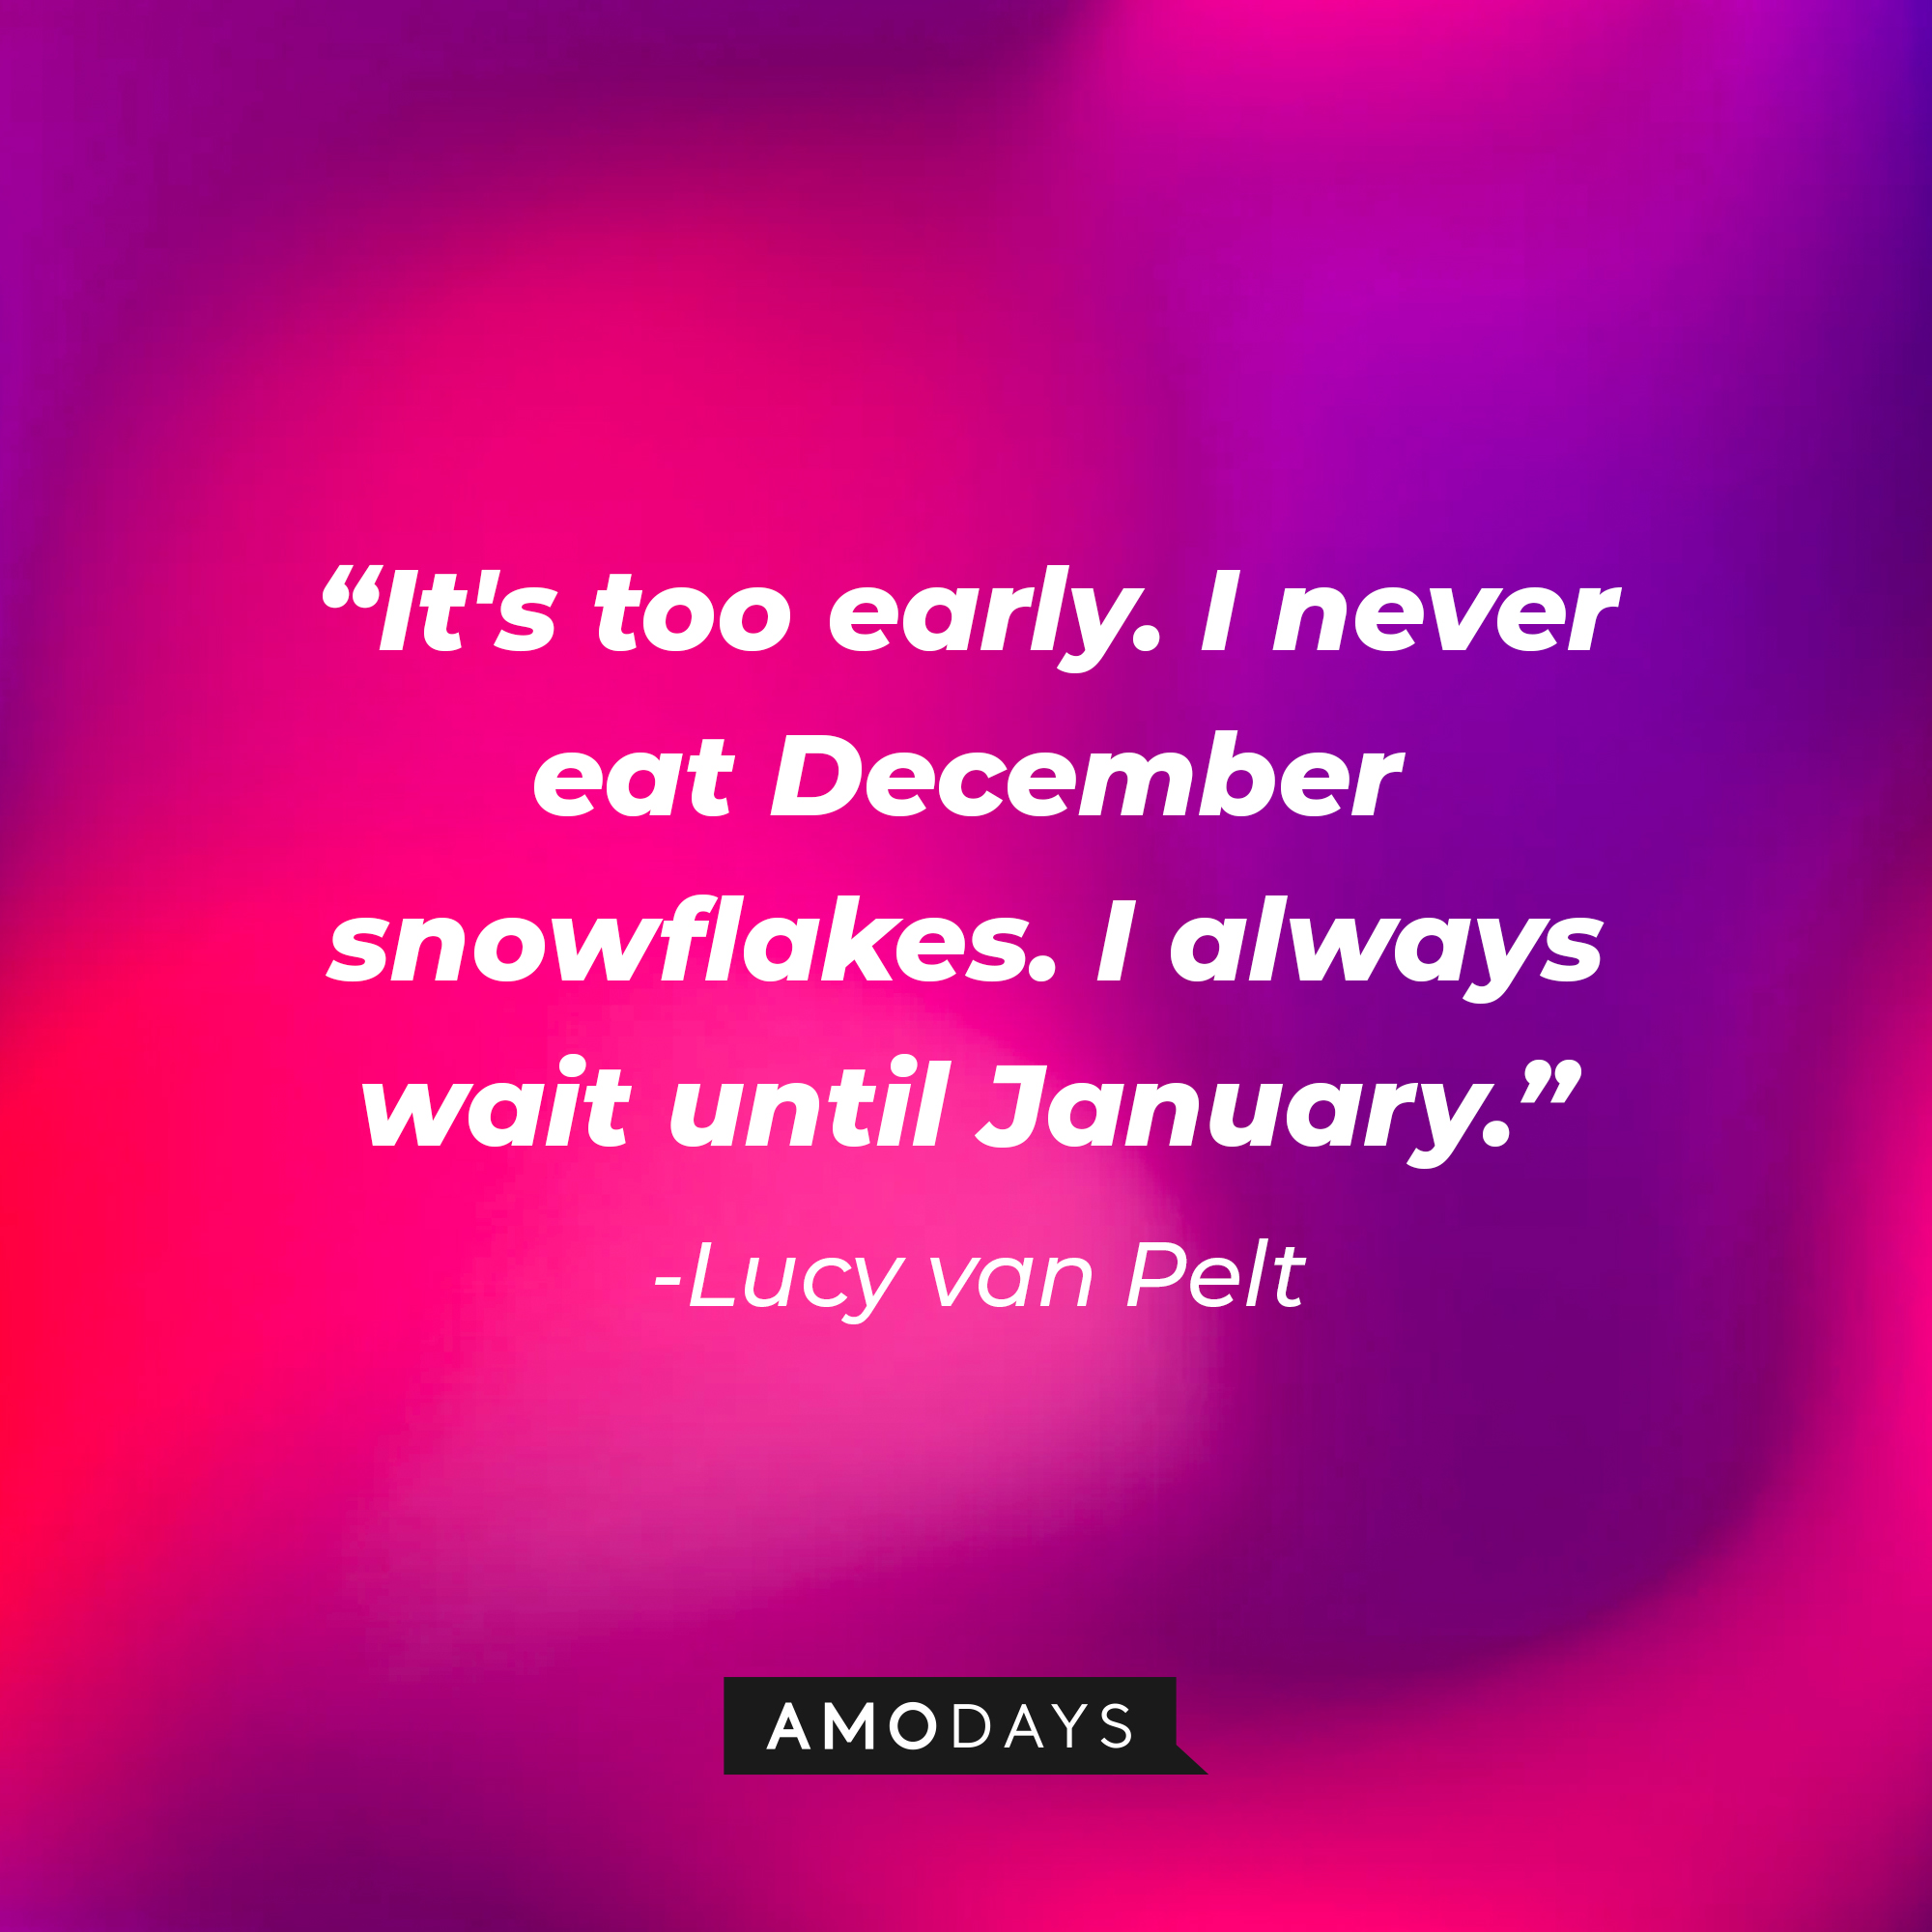 Lucy Van Pelt's quote: "It's too early. I never eat December snowflakes. I always wait until January." | Source: Amodays